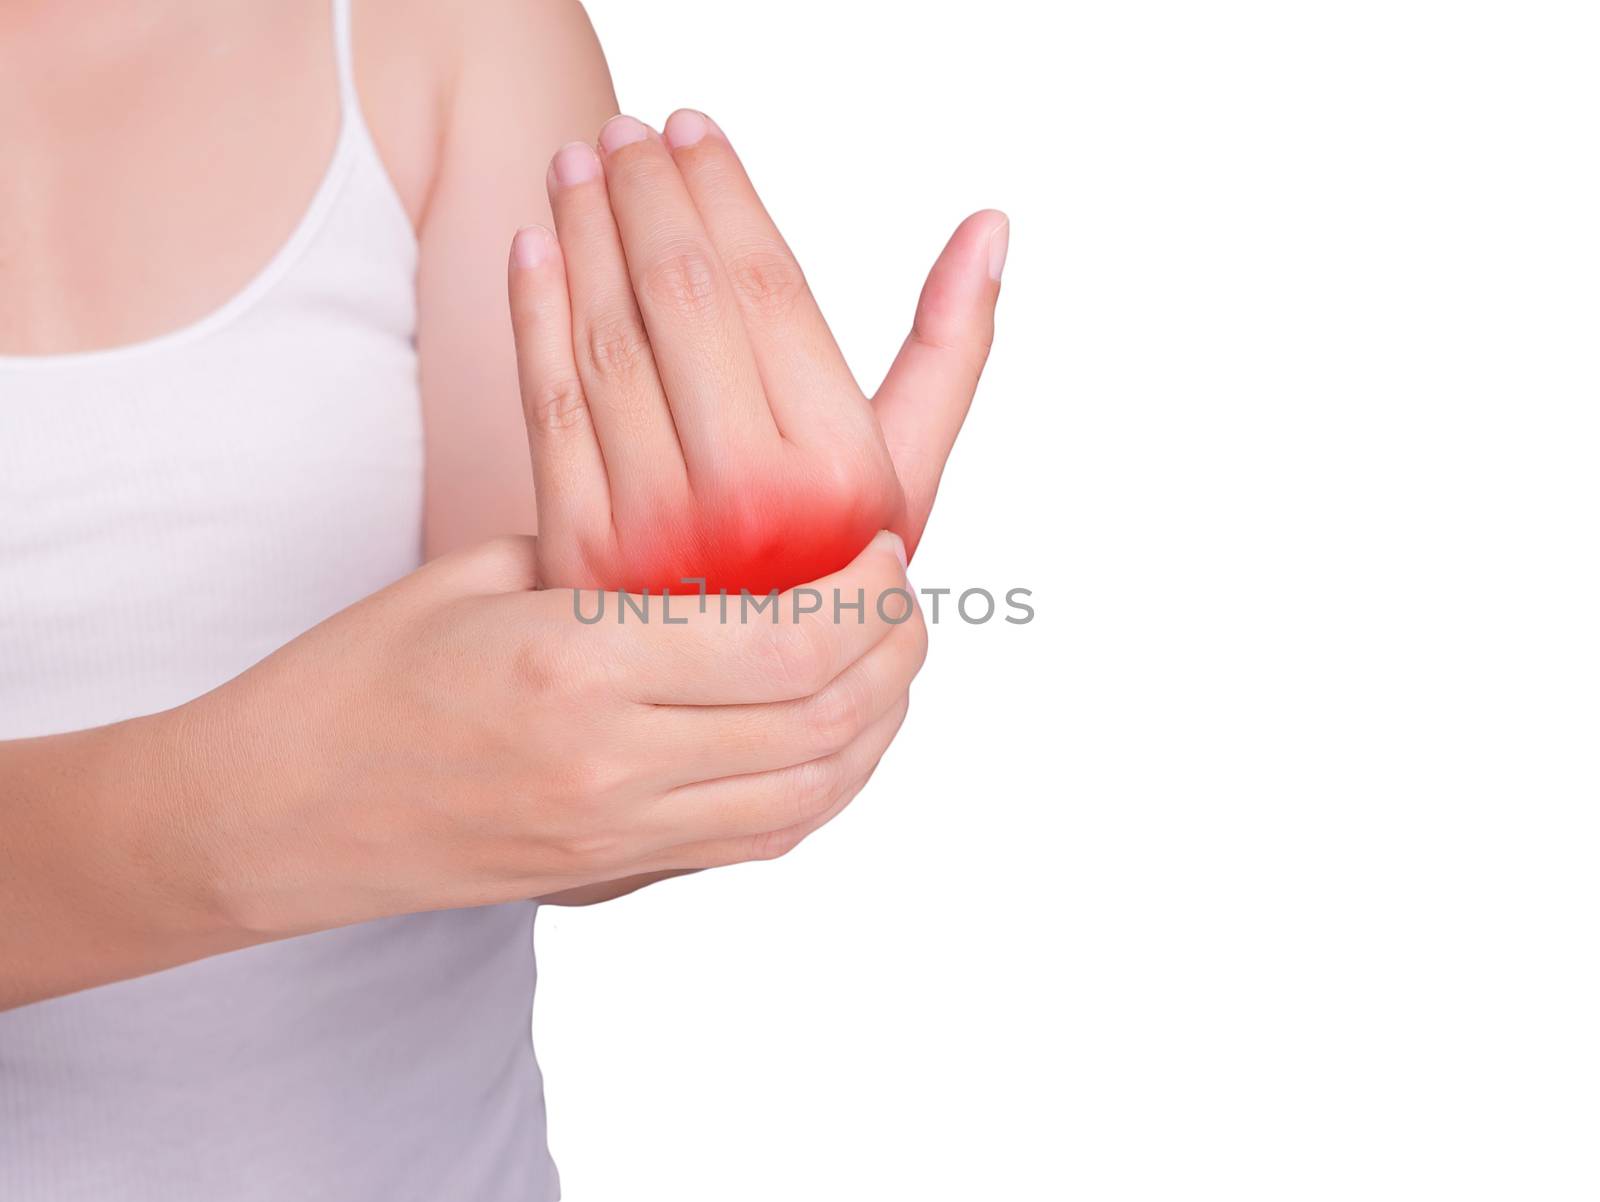 woman suffering from pain in hand. red color highlight at hand isolated on white background. health care and medical concept, studio shot by asiandelight